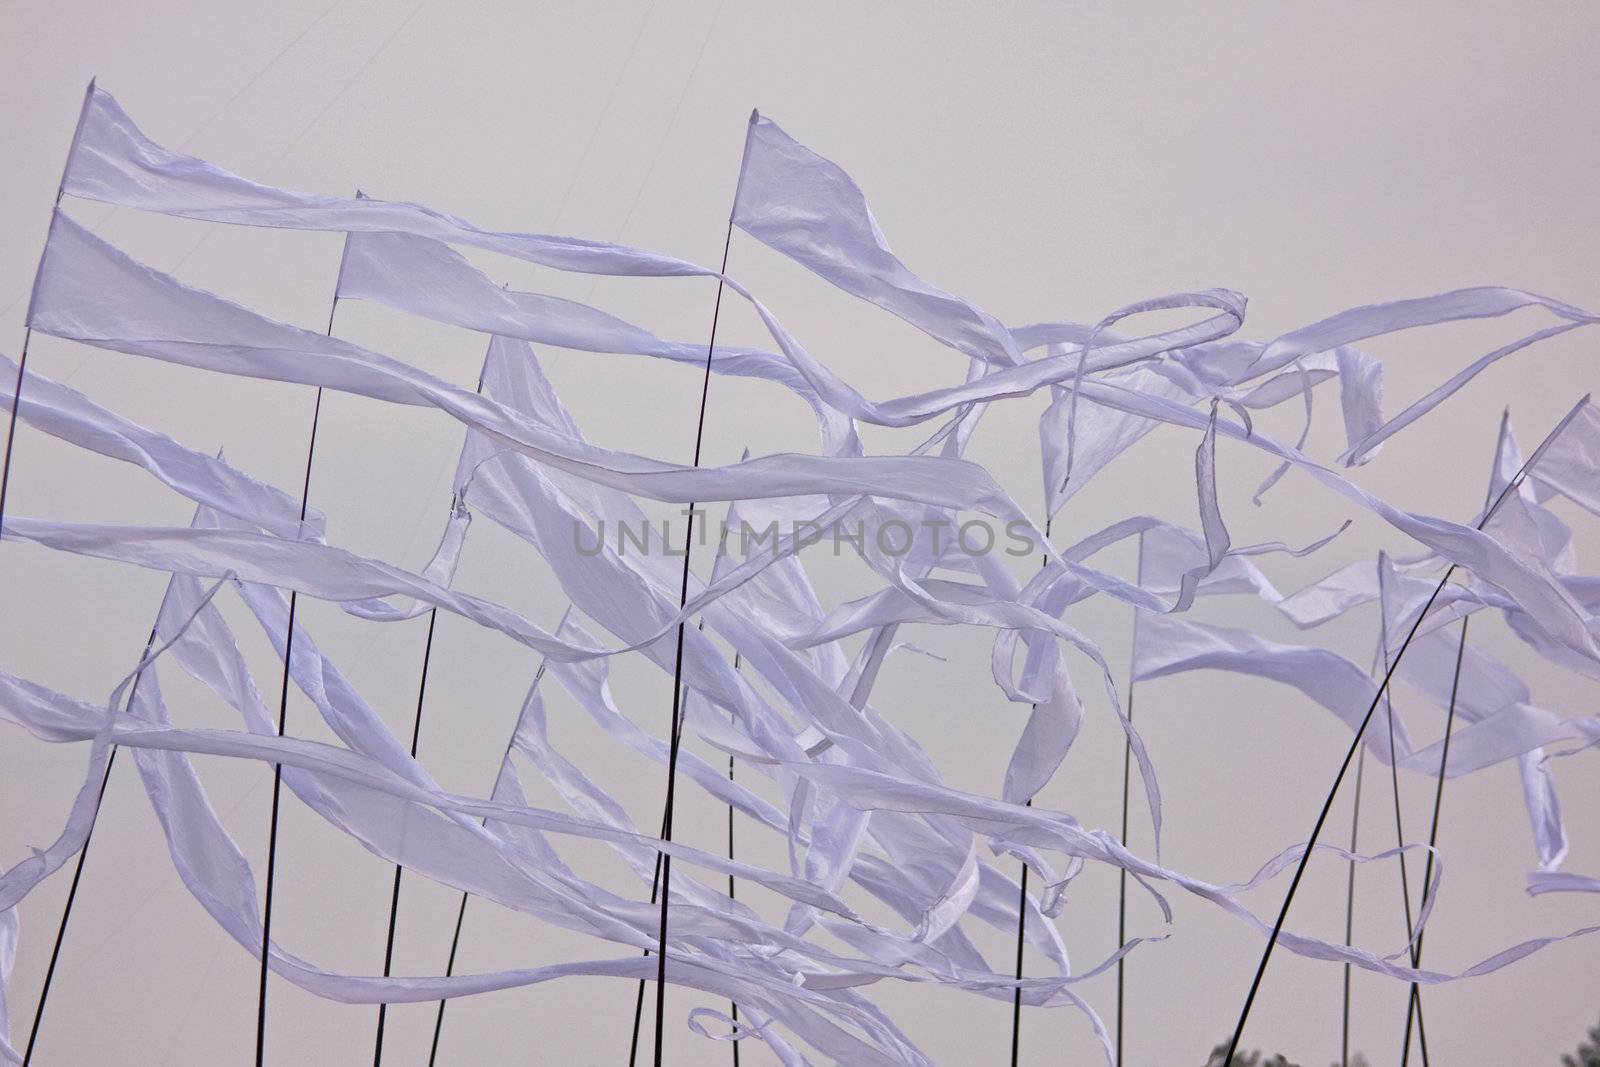 Flags streamed by the wind at the entrance to a festival